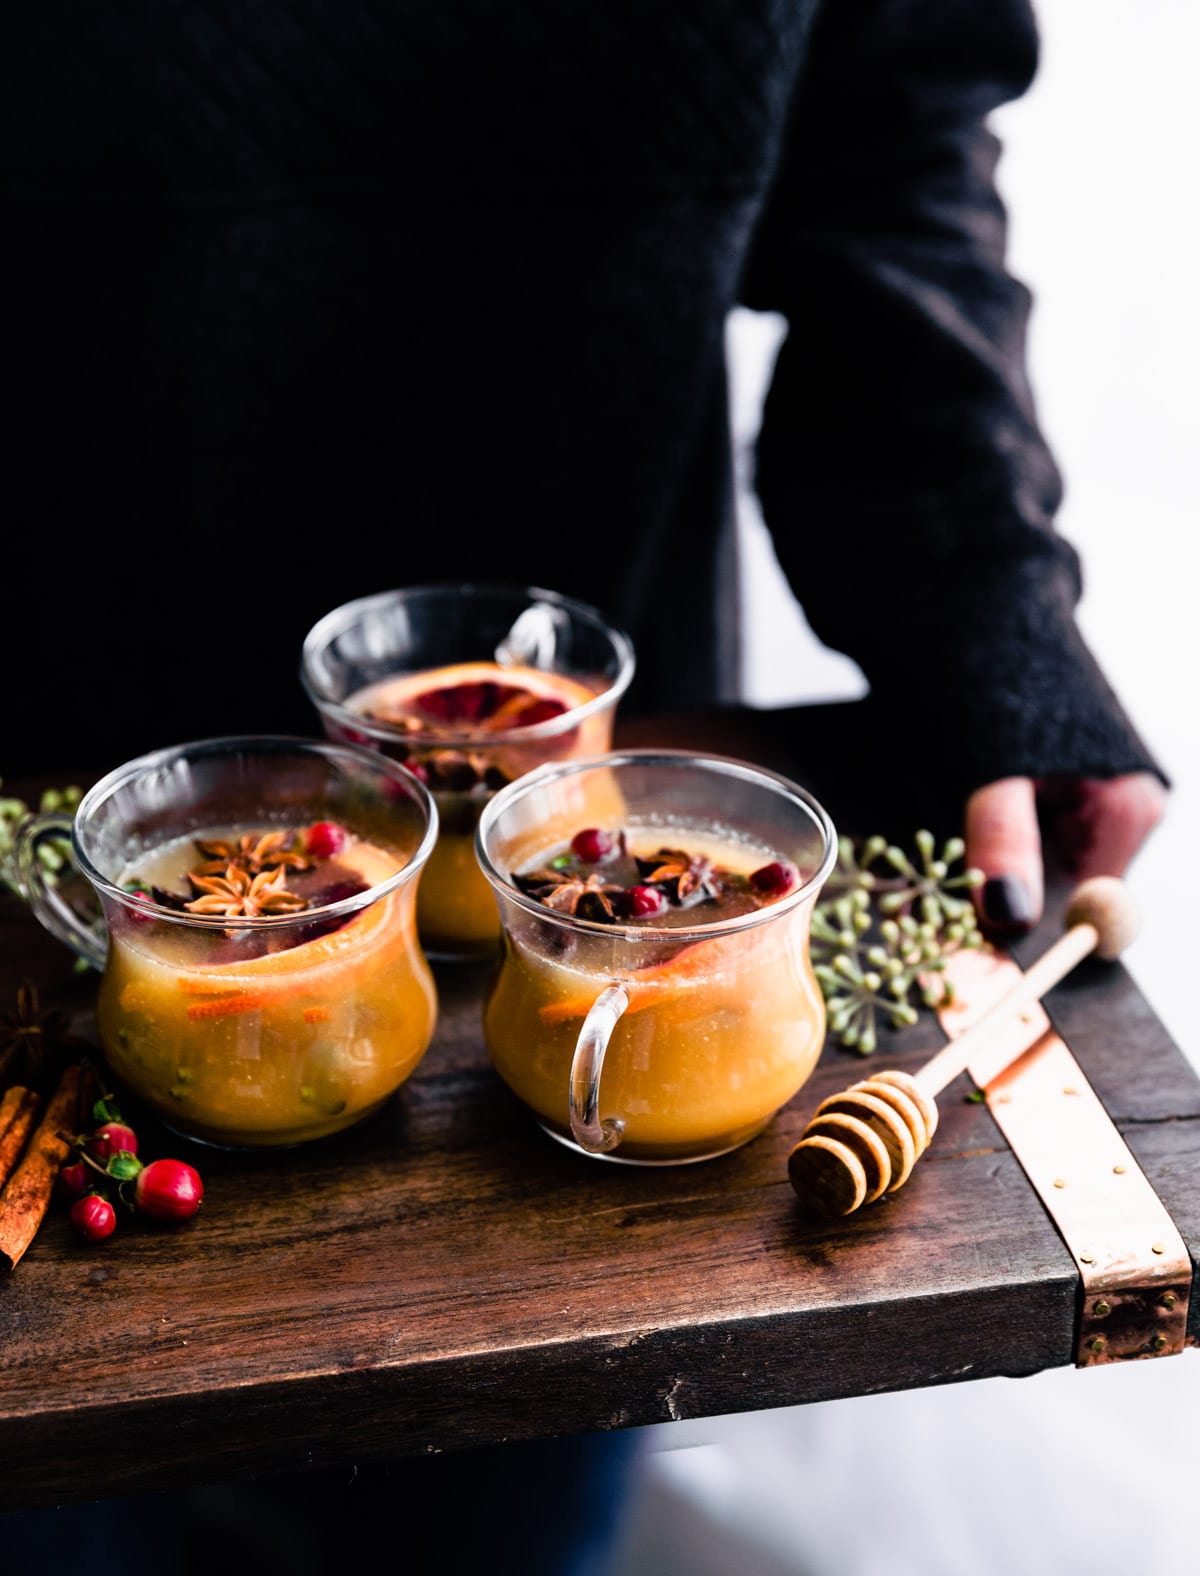 A woman holding a wooden platter holding three cups of hot toddy with spiced rum, fresh cranberries, orange slices and star anise floating in drinks